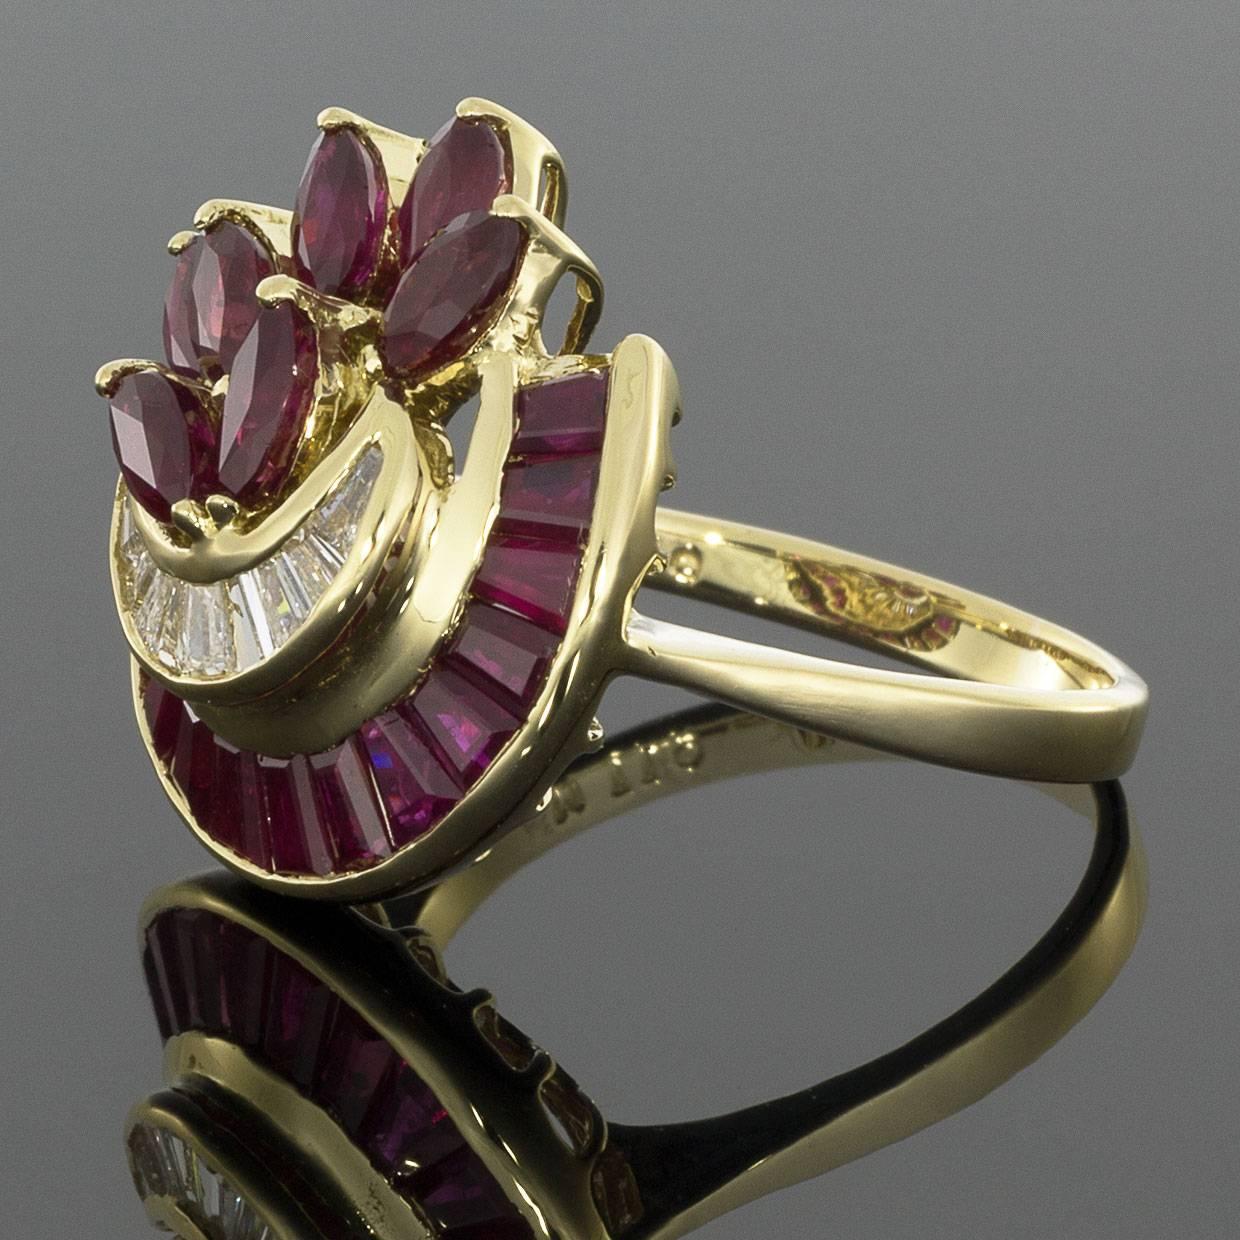 This beautiful ruby ring is a unique addition to dress up any outfit! The vintage pieces features 22 marquise and tapered baguette rubies. The marquise rubies are channel set in a crescent shape. 9 tapered channel-set baguette diamonds accent the